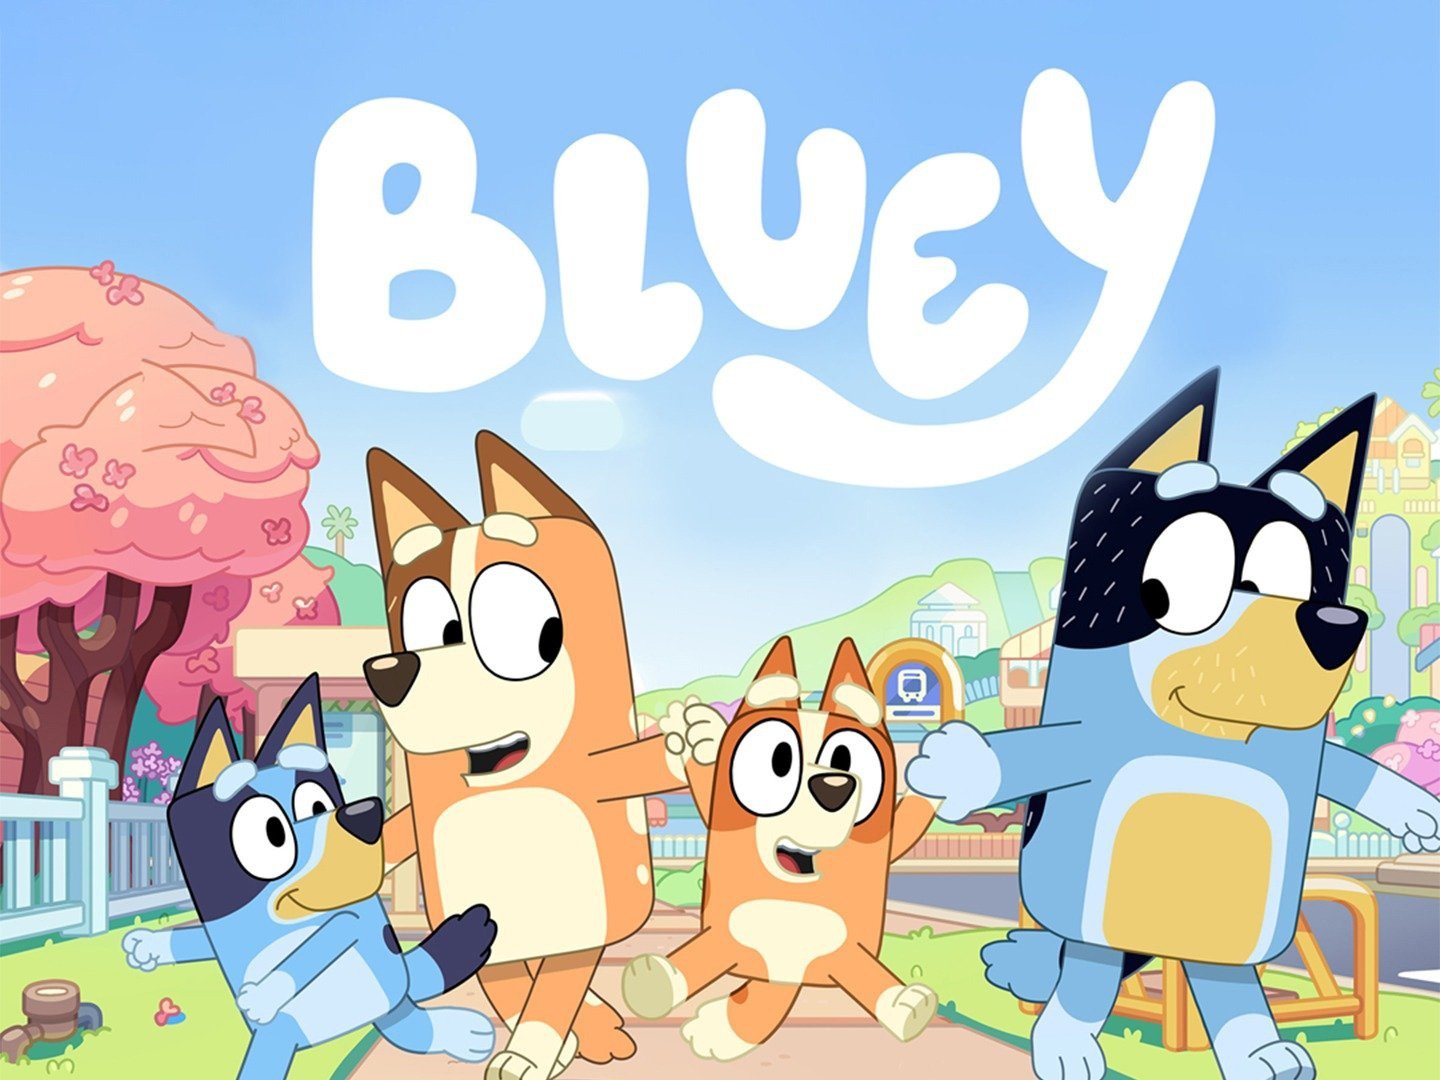 Bluey Wallpaper Browse Bluey Wallpaper with collections of Always Tomorrow  Animated Bingo Bluey Di  Cartoon wallpaper Cartoon wallpaper iphone  Disney junior